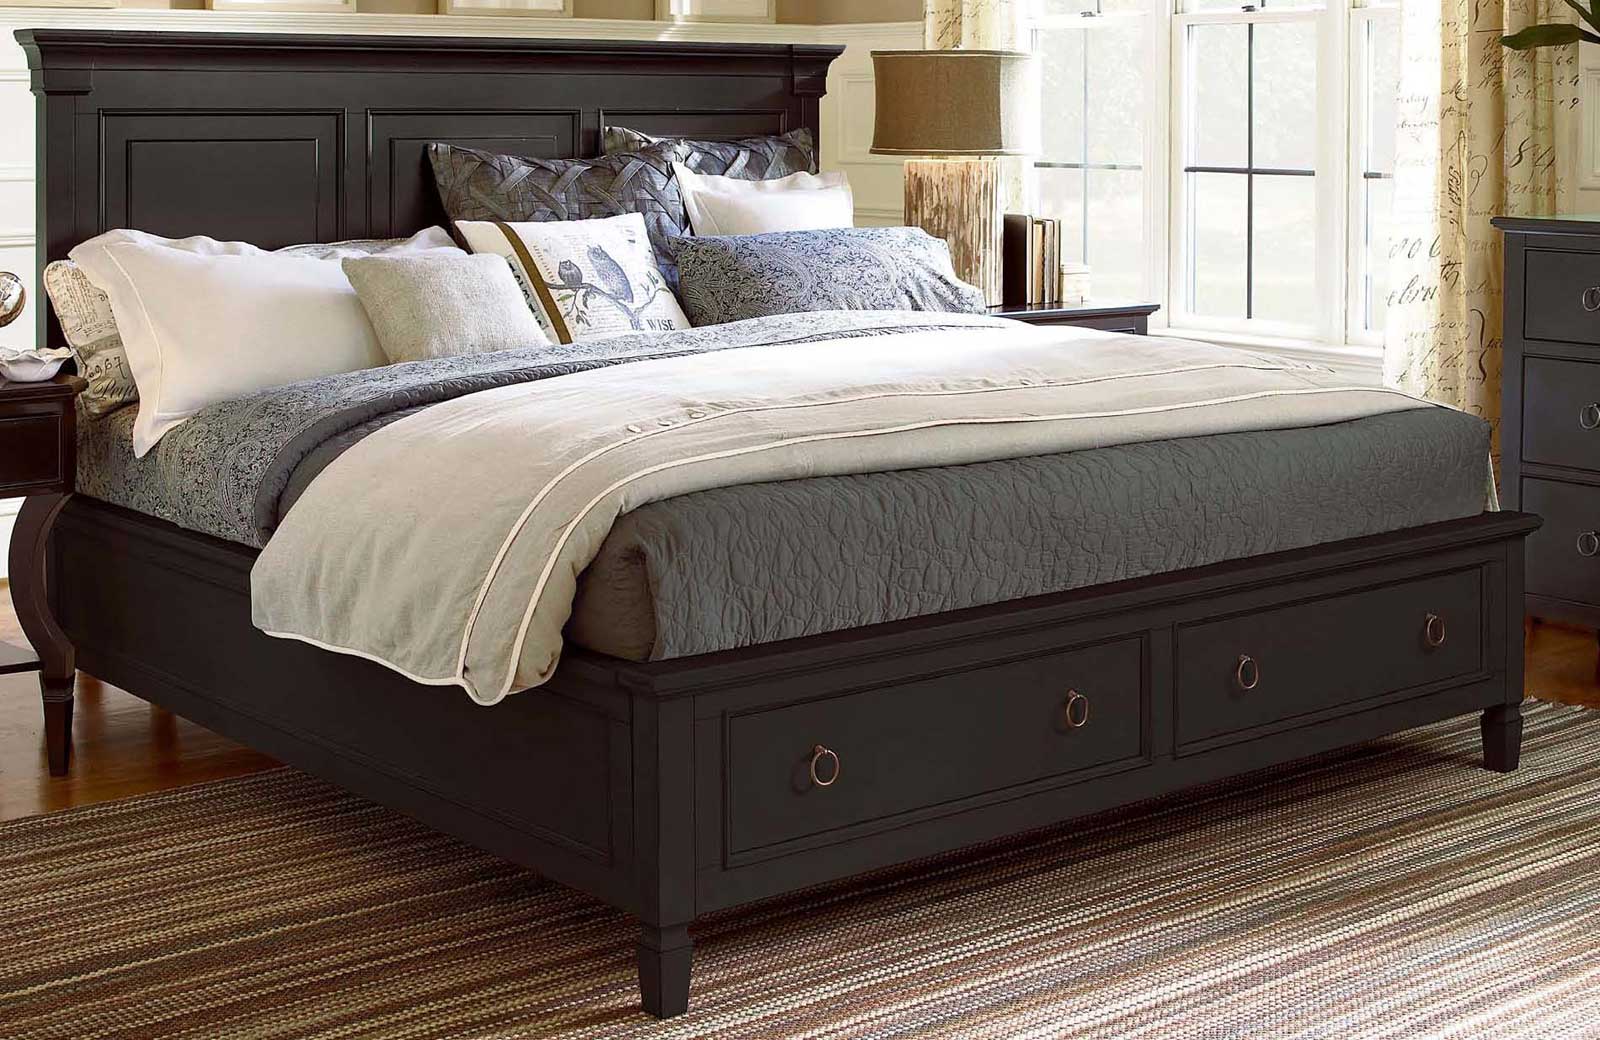 King Bedroom Small Amazing King Bedroom Sets For Small Bedroom Design Ideas With Classy Dark Wood Under Bed Storage Ideas And Traditional Lingerie Chest Cabinet Design Also Charming Gray Bed Spread Ideas Bedroom Enhance The King Bedroom Sets: The Soft Vineyard-6